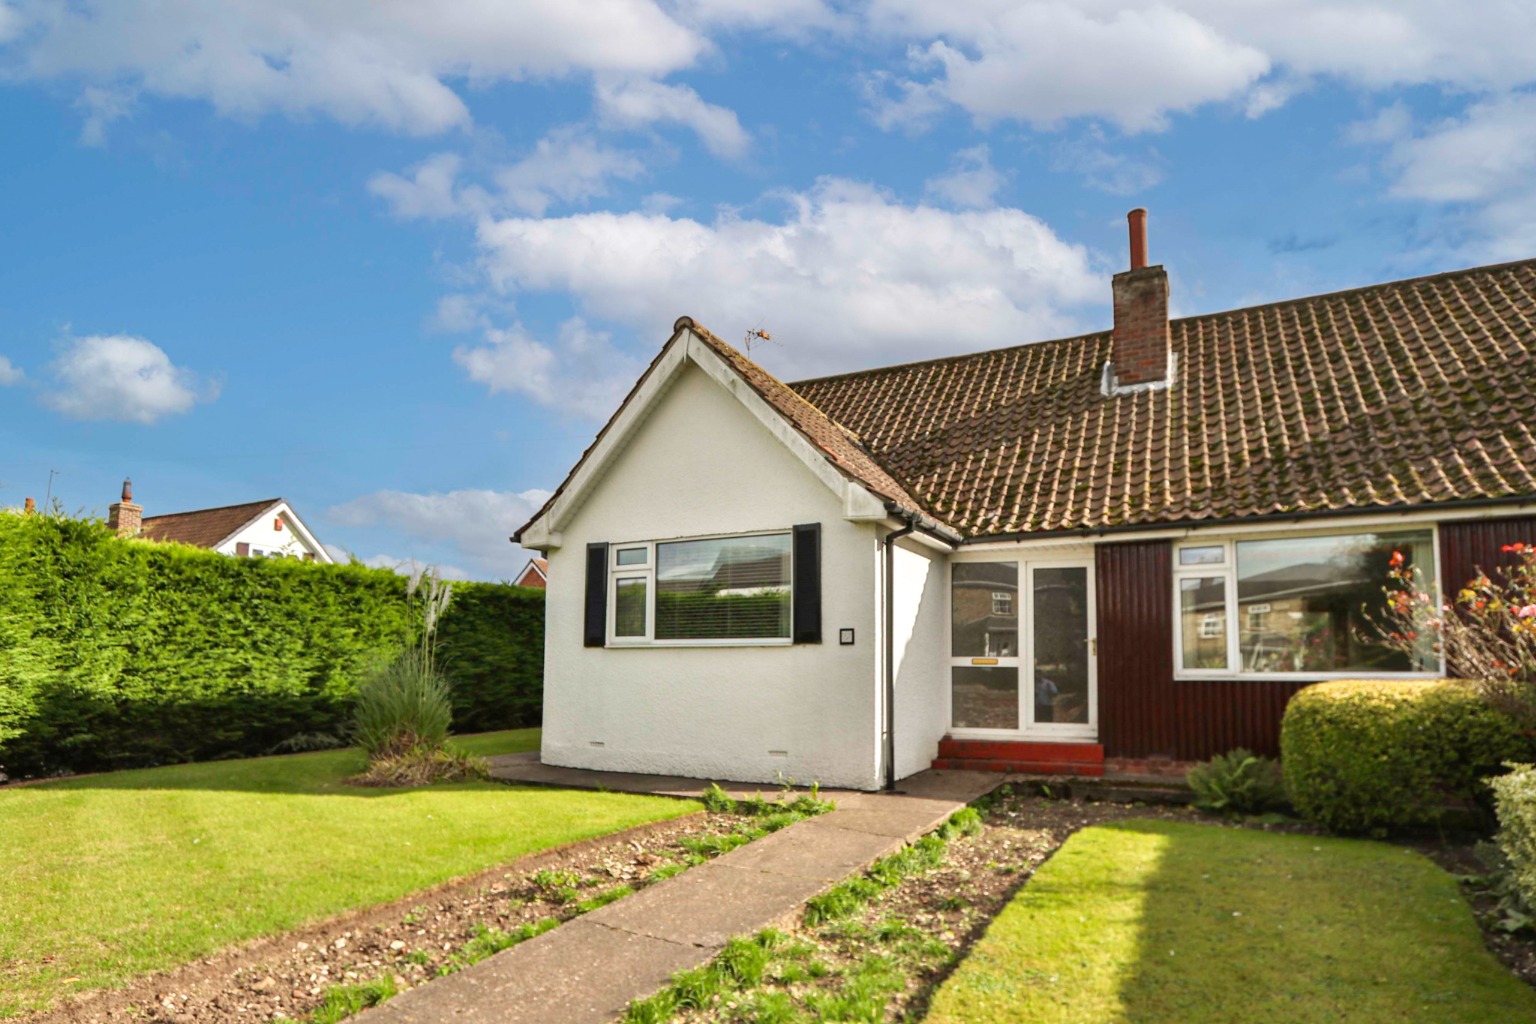 4 bed semi-detached bungalow for sale in Main Street, Cottingham, HU16